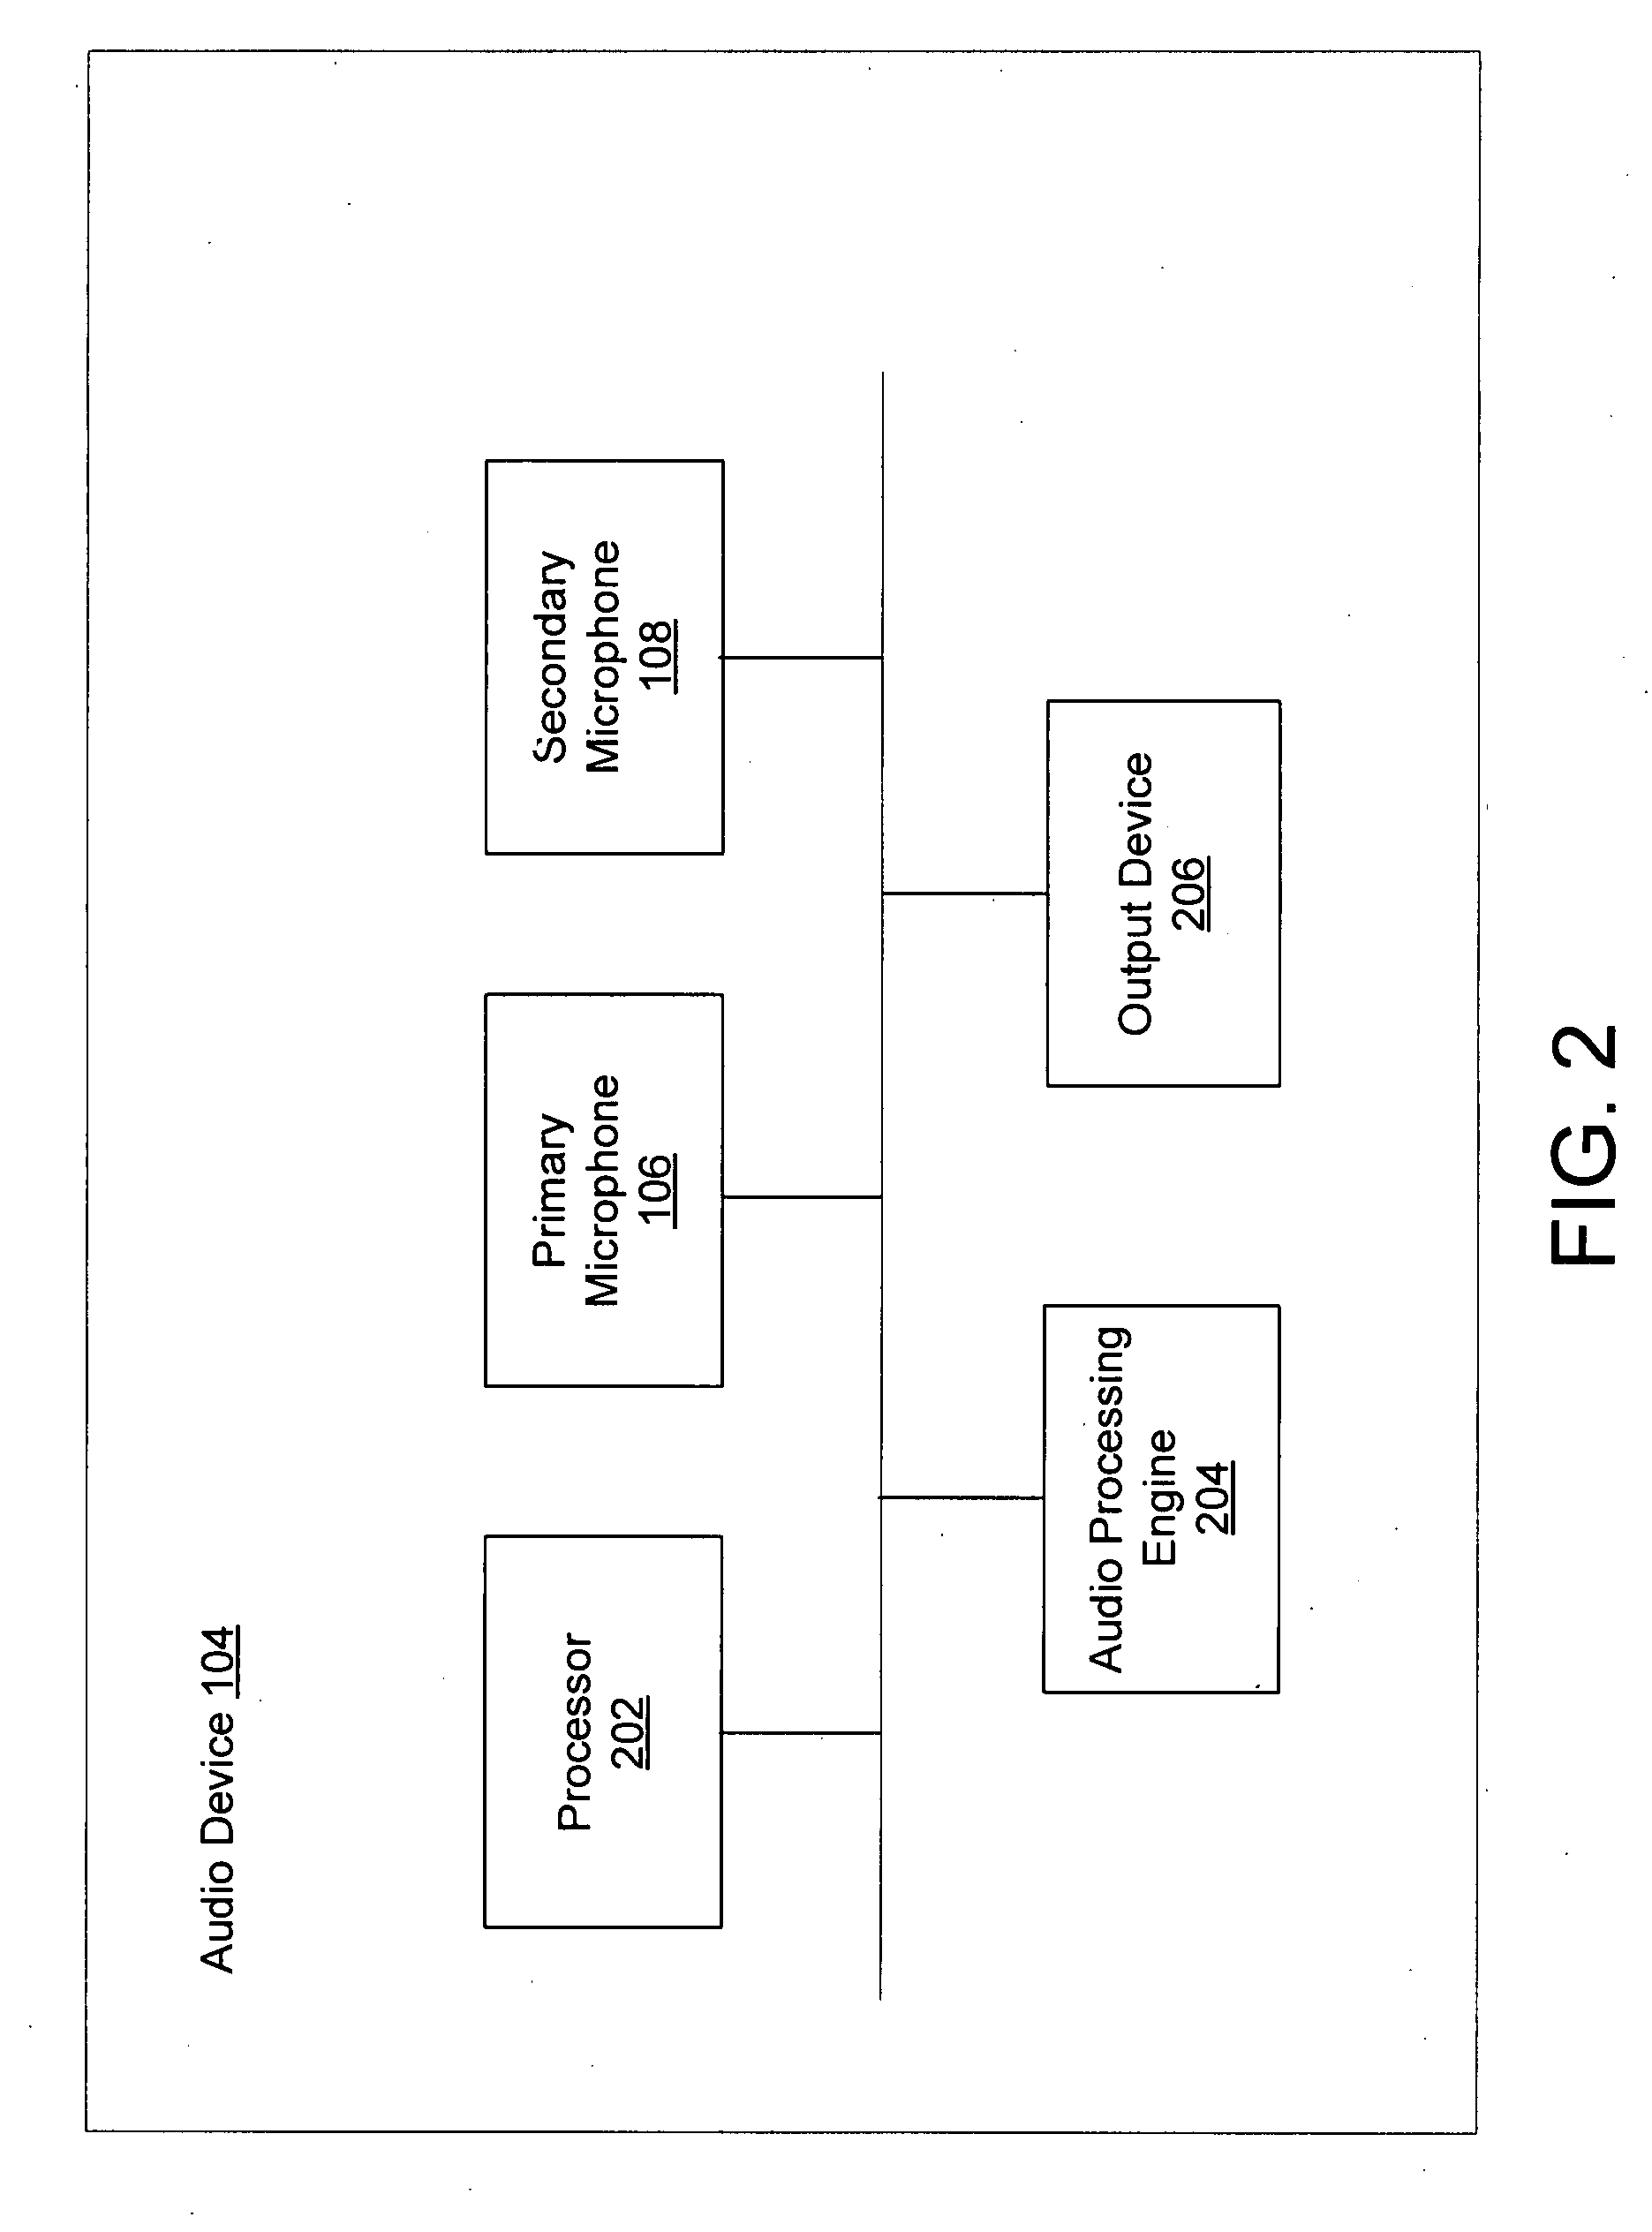 System and method for adaptive intelligent noise suppression